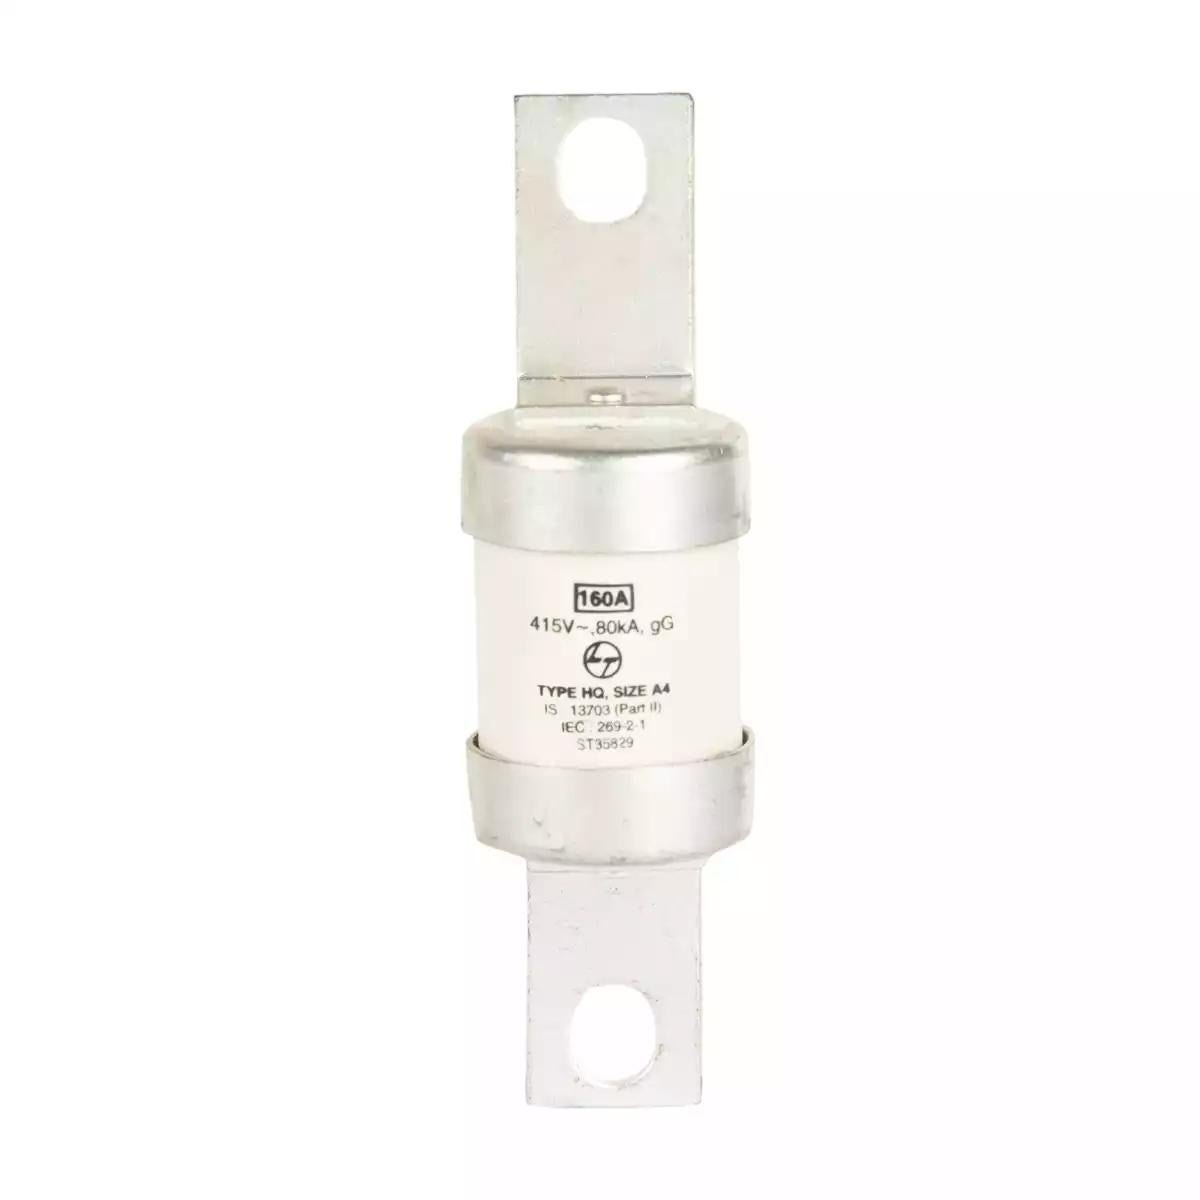 HQ Bolted HRC fuse 80A 415V AC Size A4